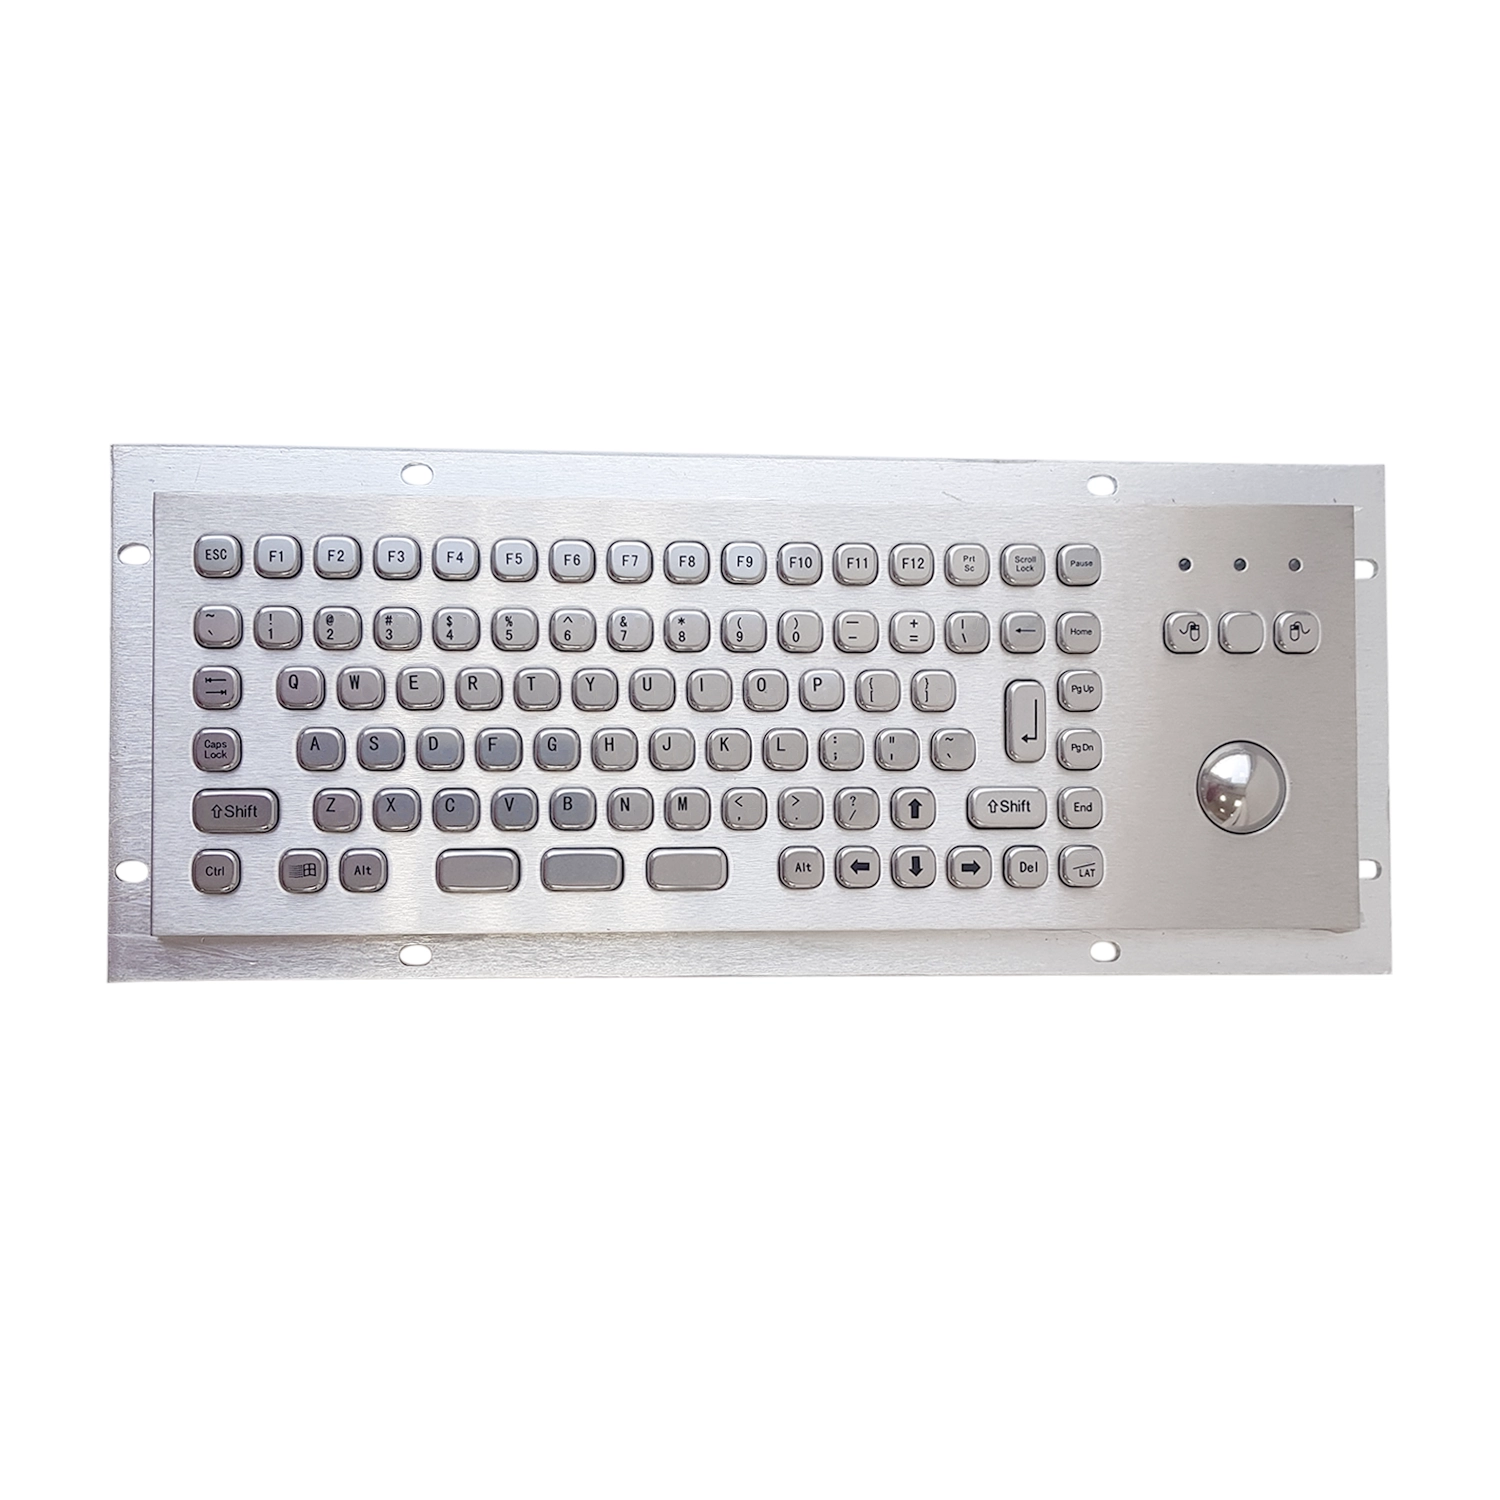 Rugged panel mount keyboard with trackball KB-000-NW0S0T4 MINI